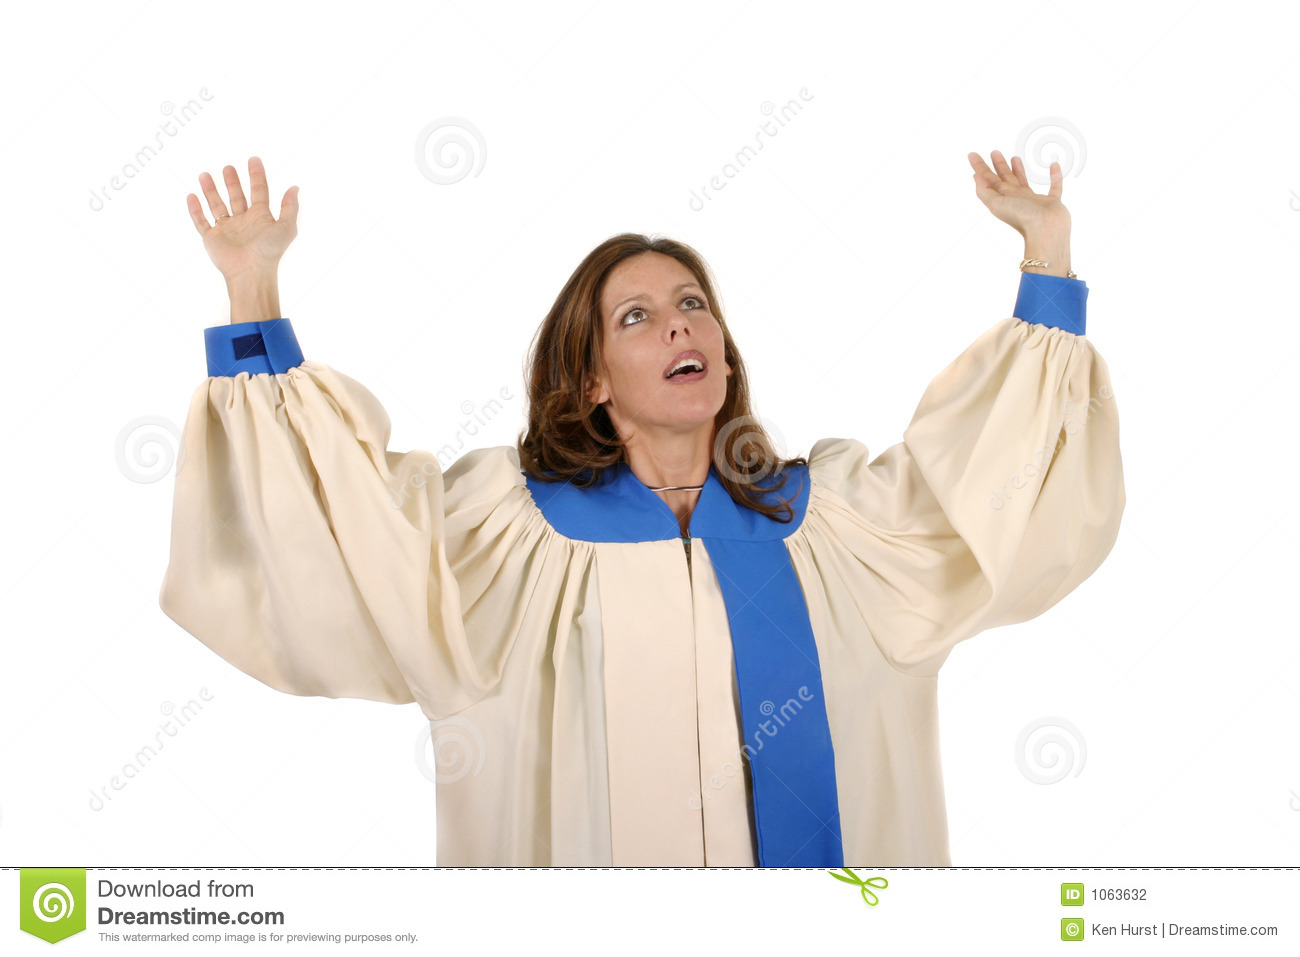 Woman In Church Choir Robe With Her Arms Raised In Charismatic Praise